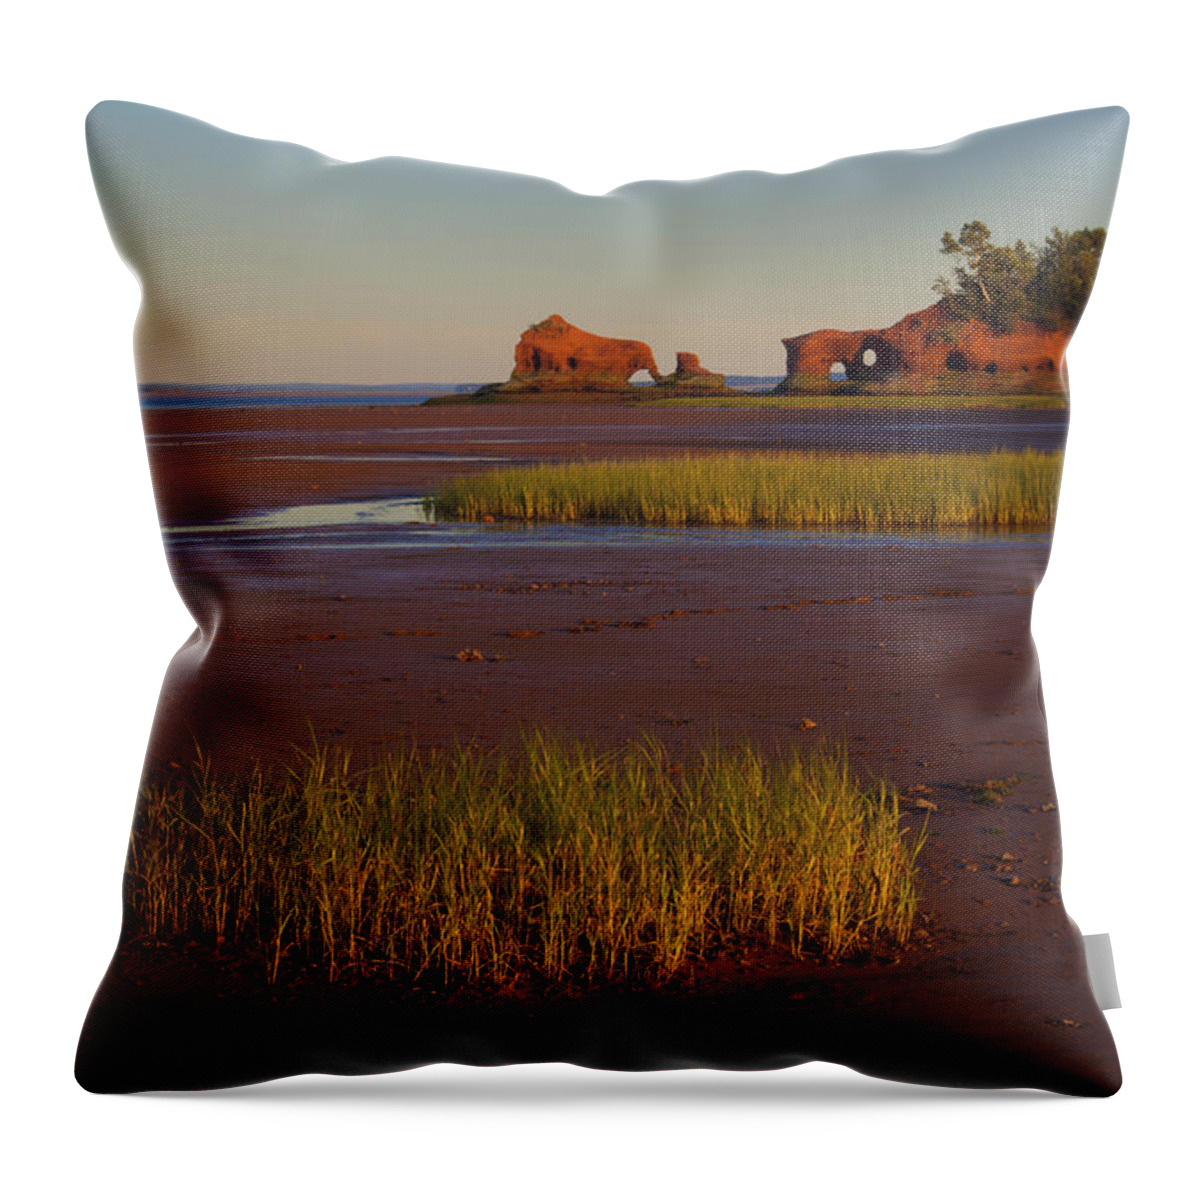 Coastline Throw Pillow featuring the photograph North Medford Coastline At Sunset by Irwin Barrett